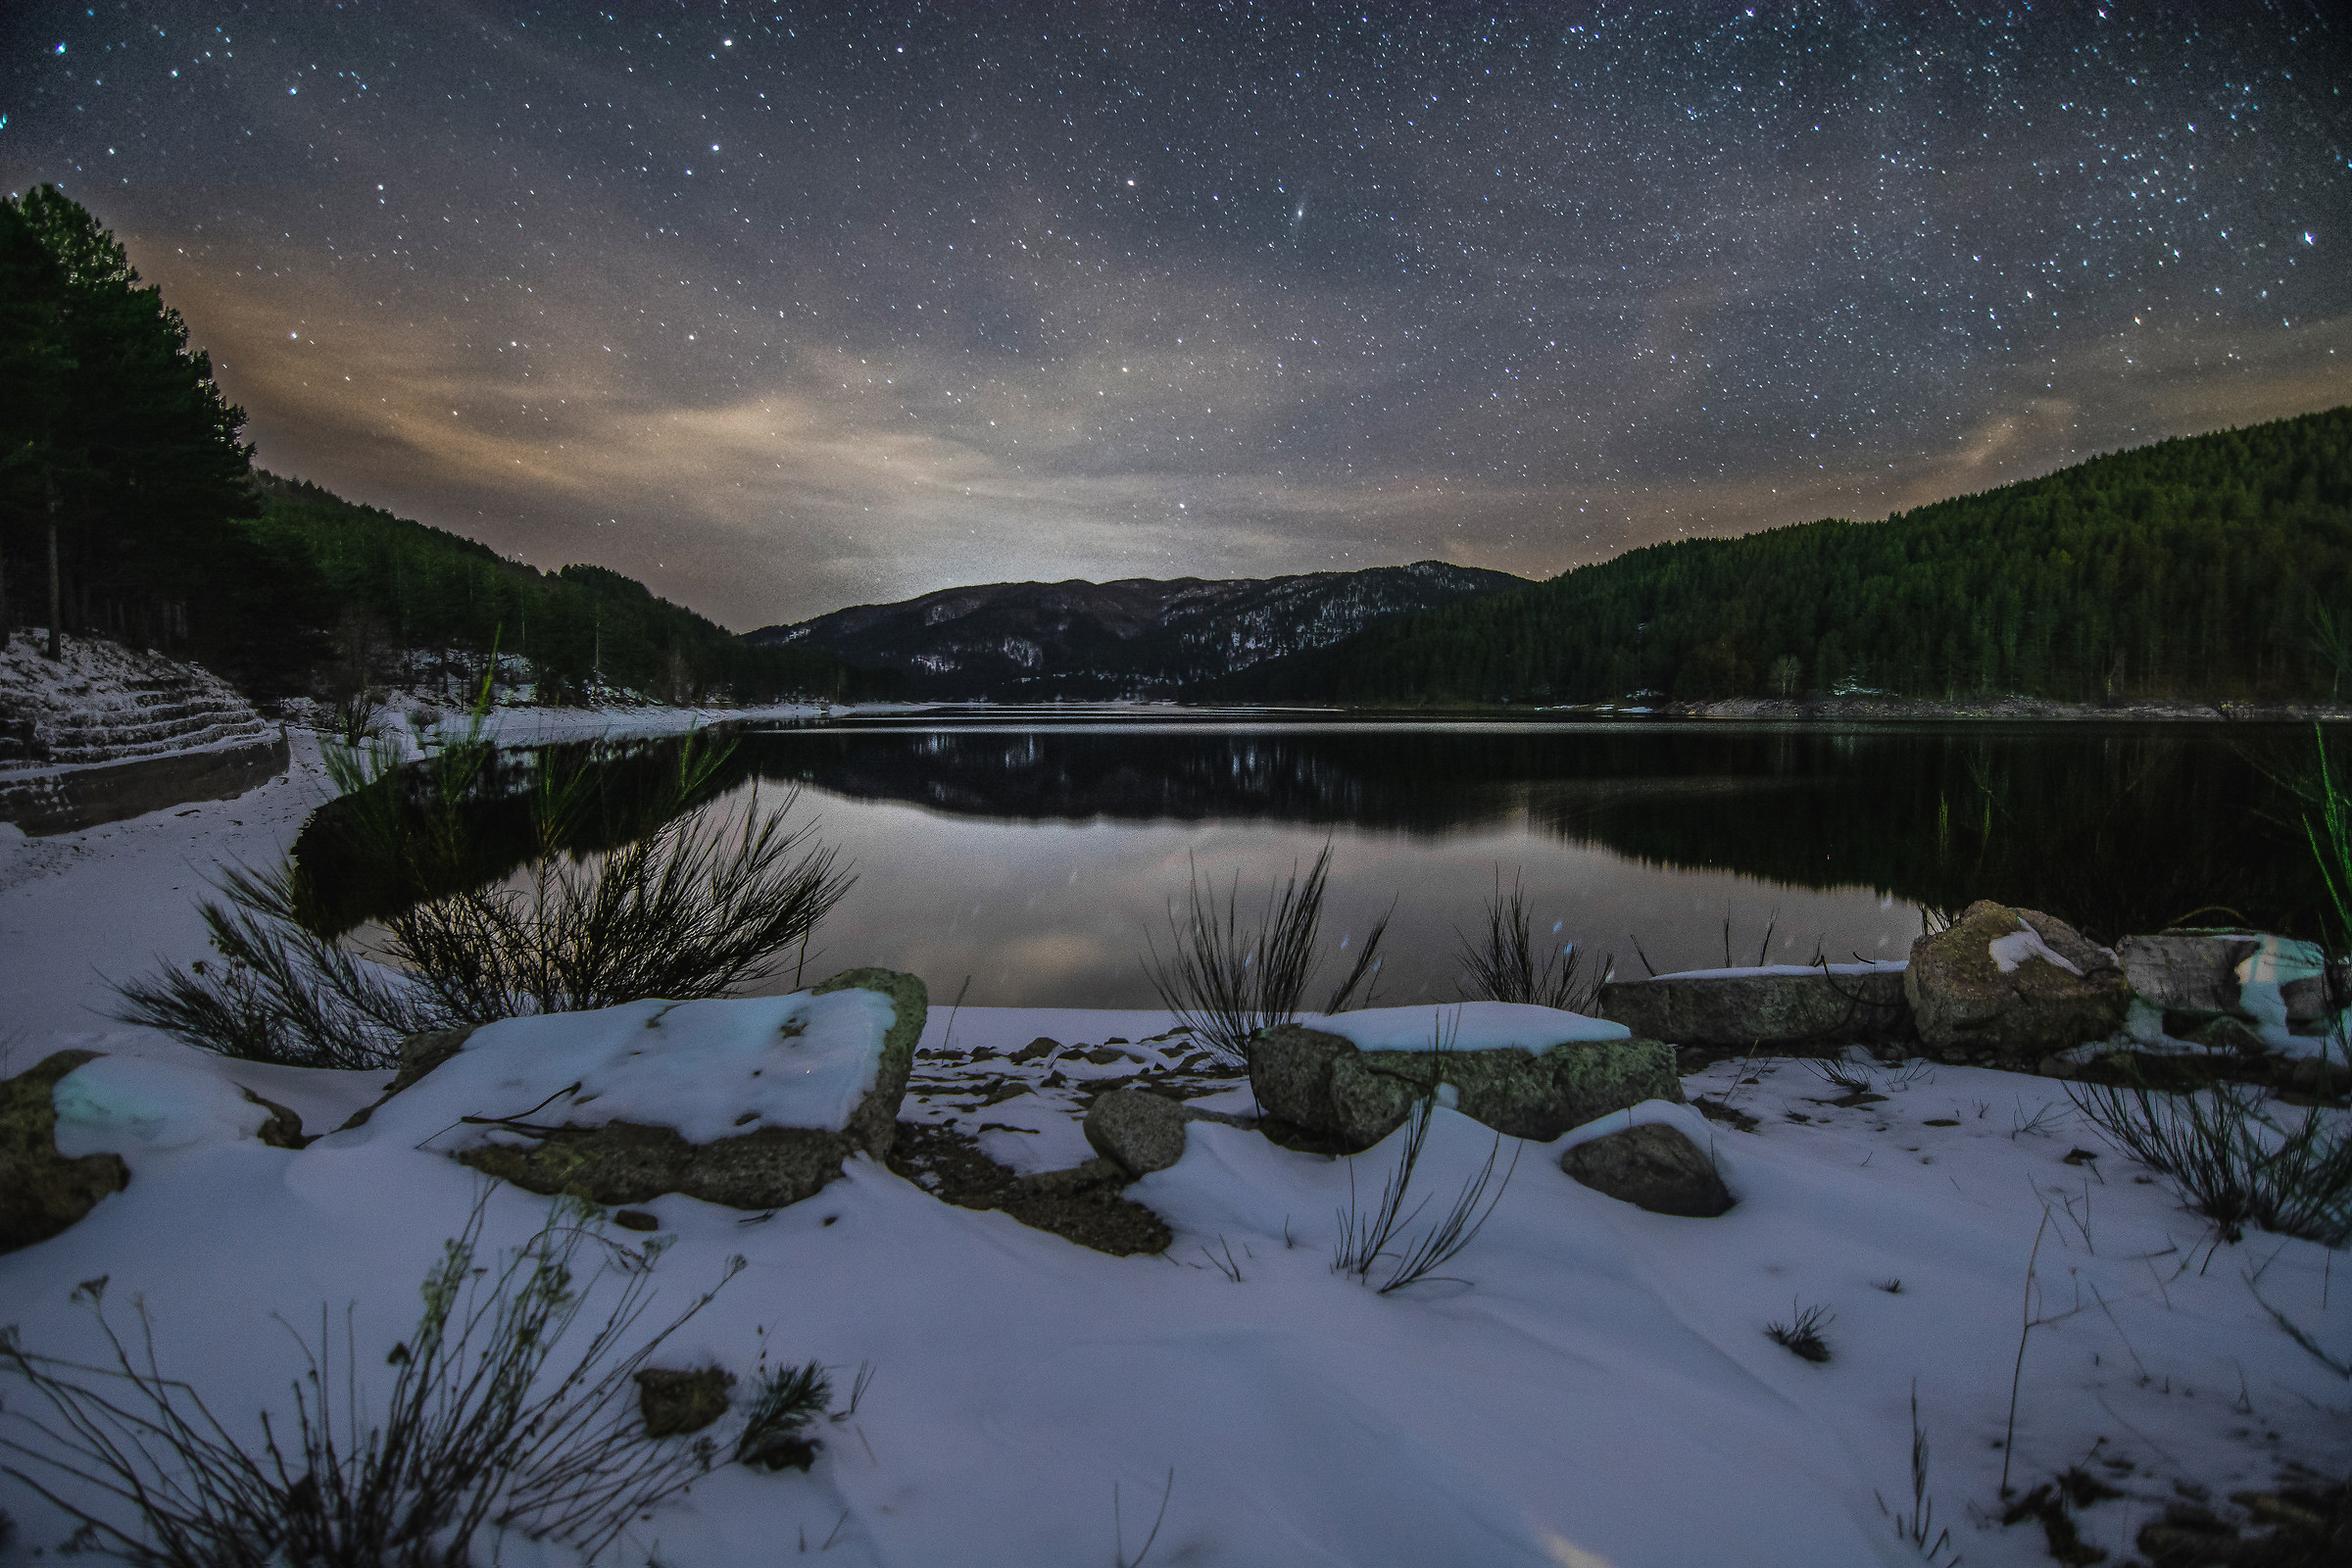 Andromeda and the snow-covered lake...